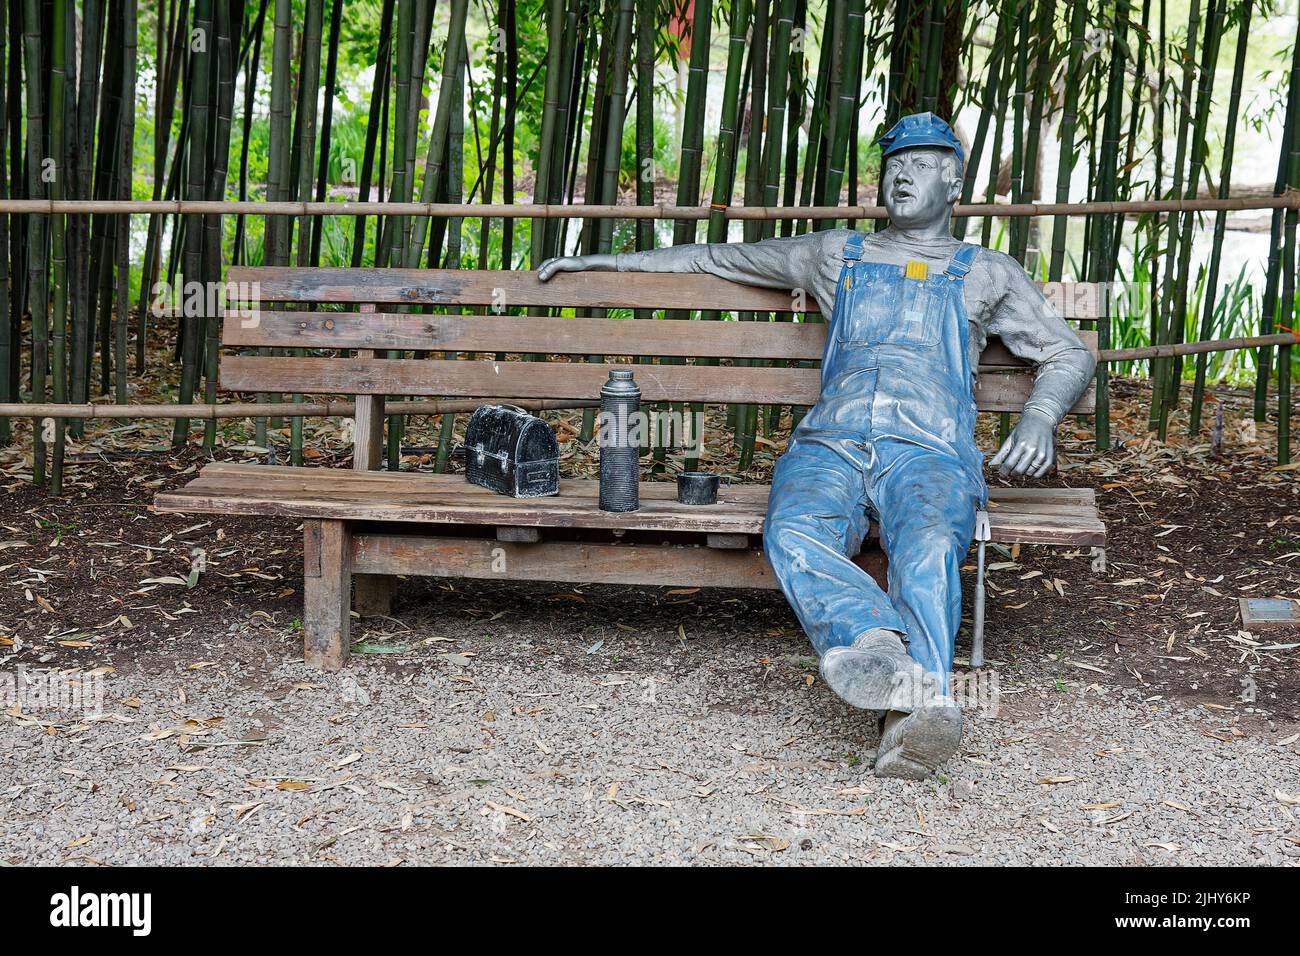 man sitting on bench, in work clothes, lunch; large  bronze sculpture, Grounds for Sculpture; Seward Johnson Center for the Arts; New Jersey; Hamilton Stock Photo